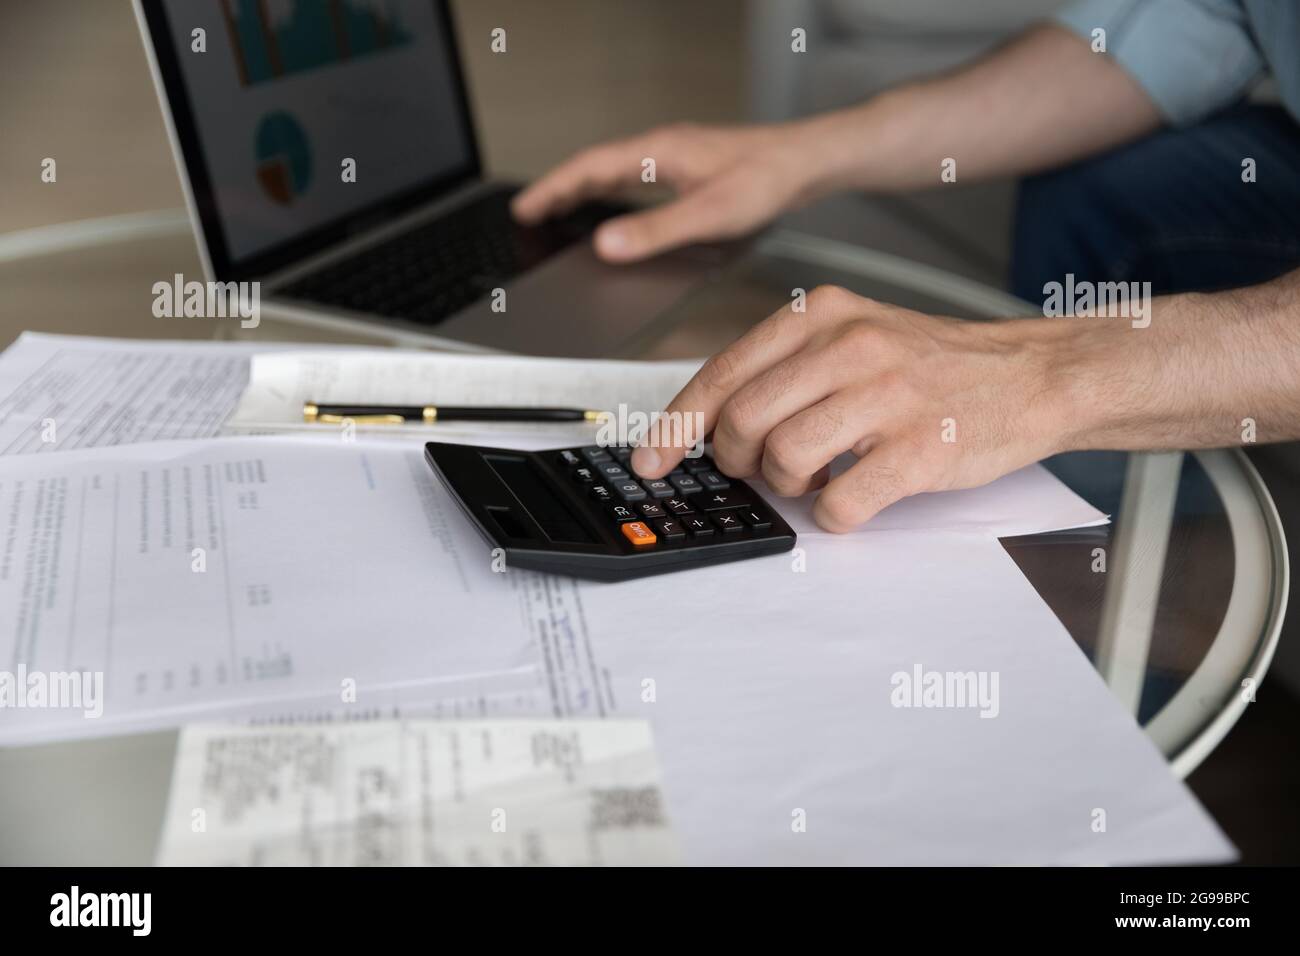 Male works with financial statements using calculator and laptop closeup Stock Photo